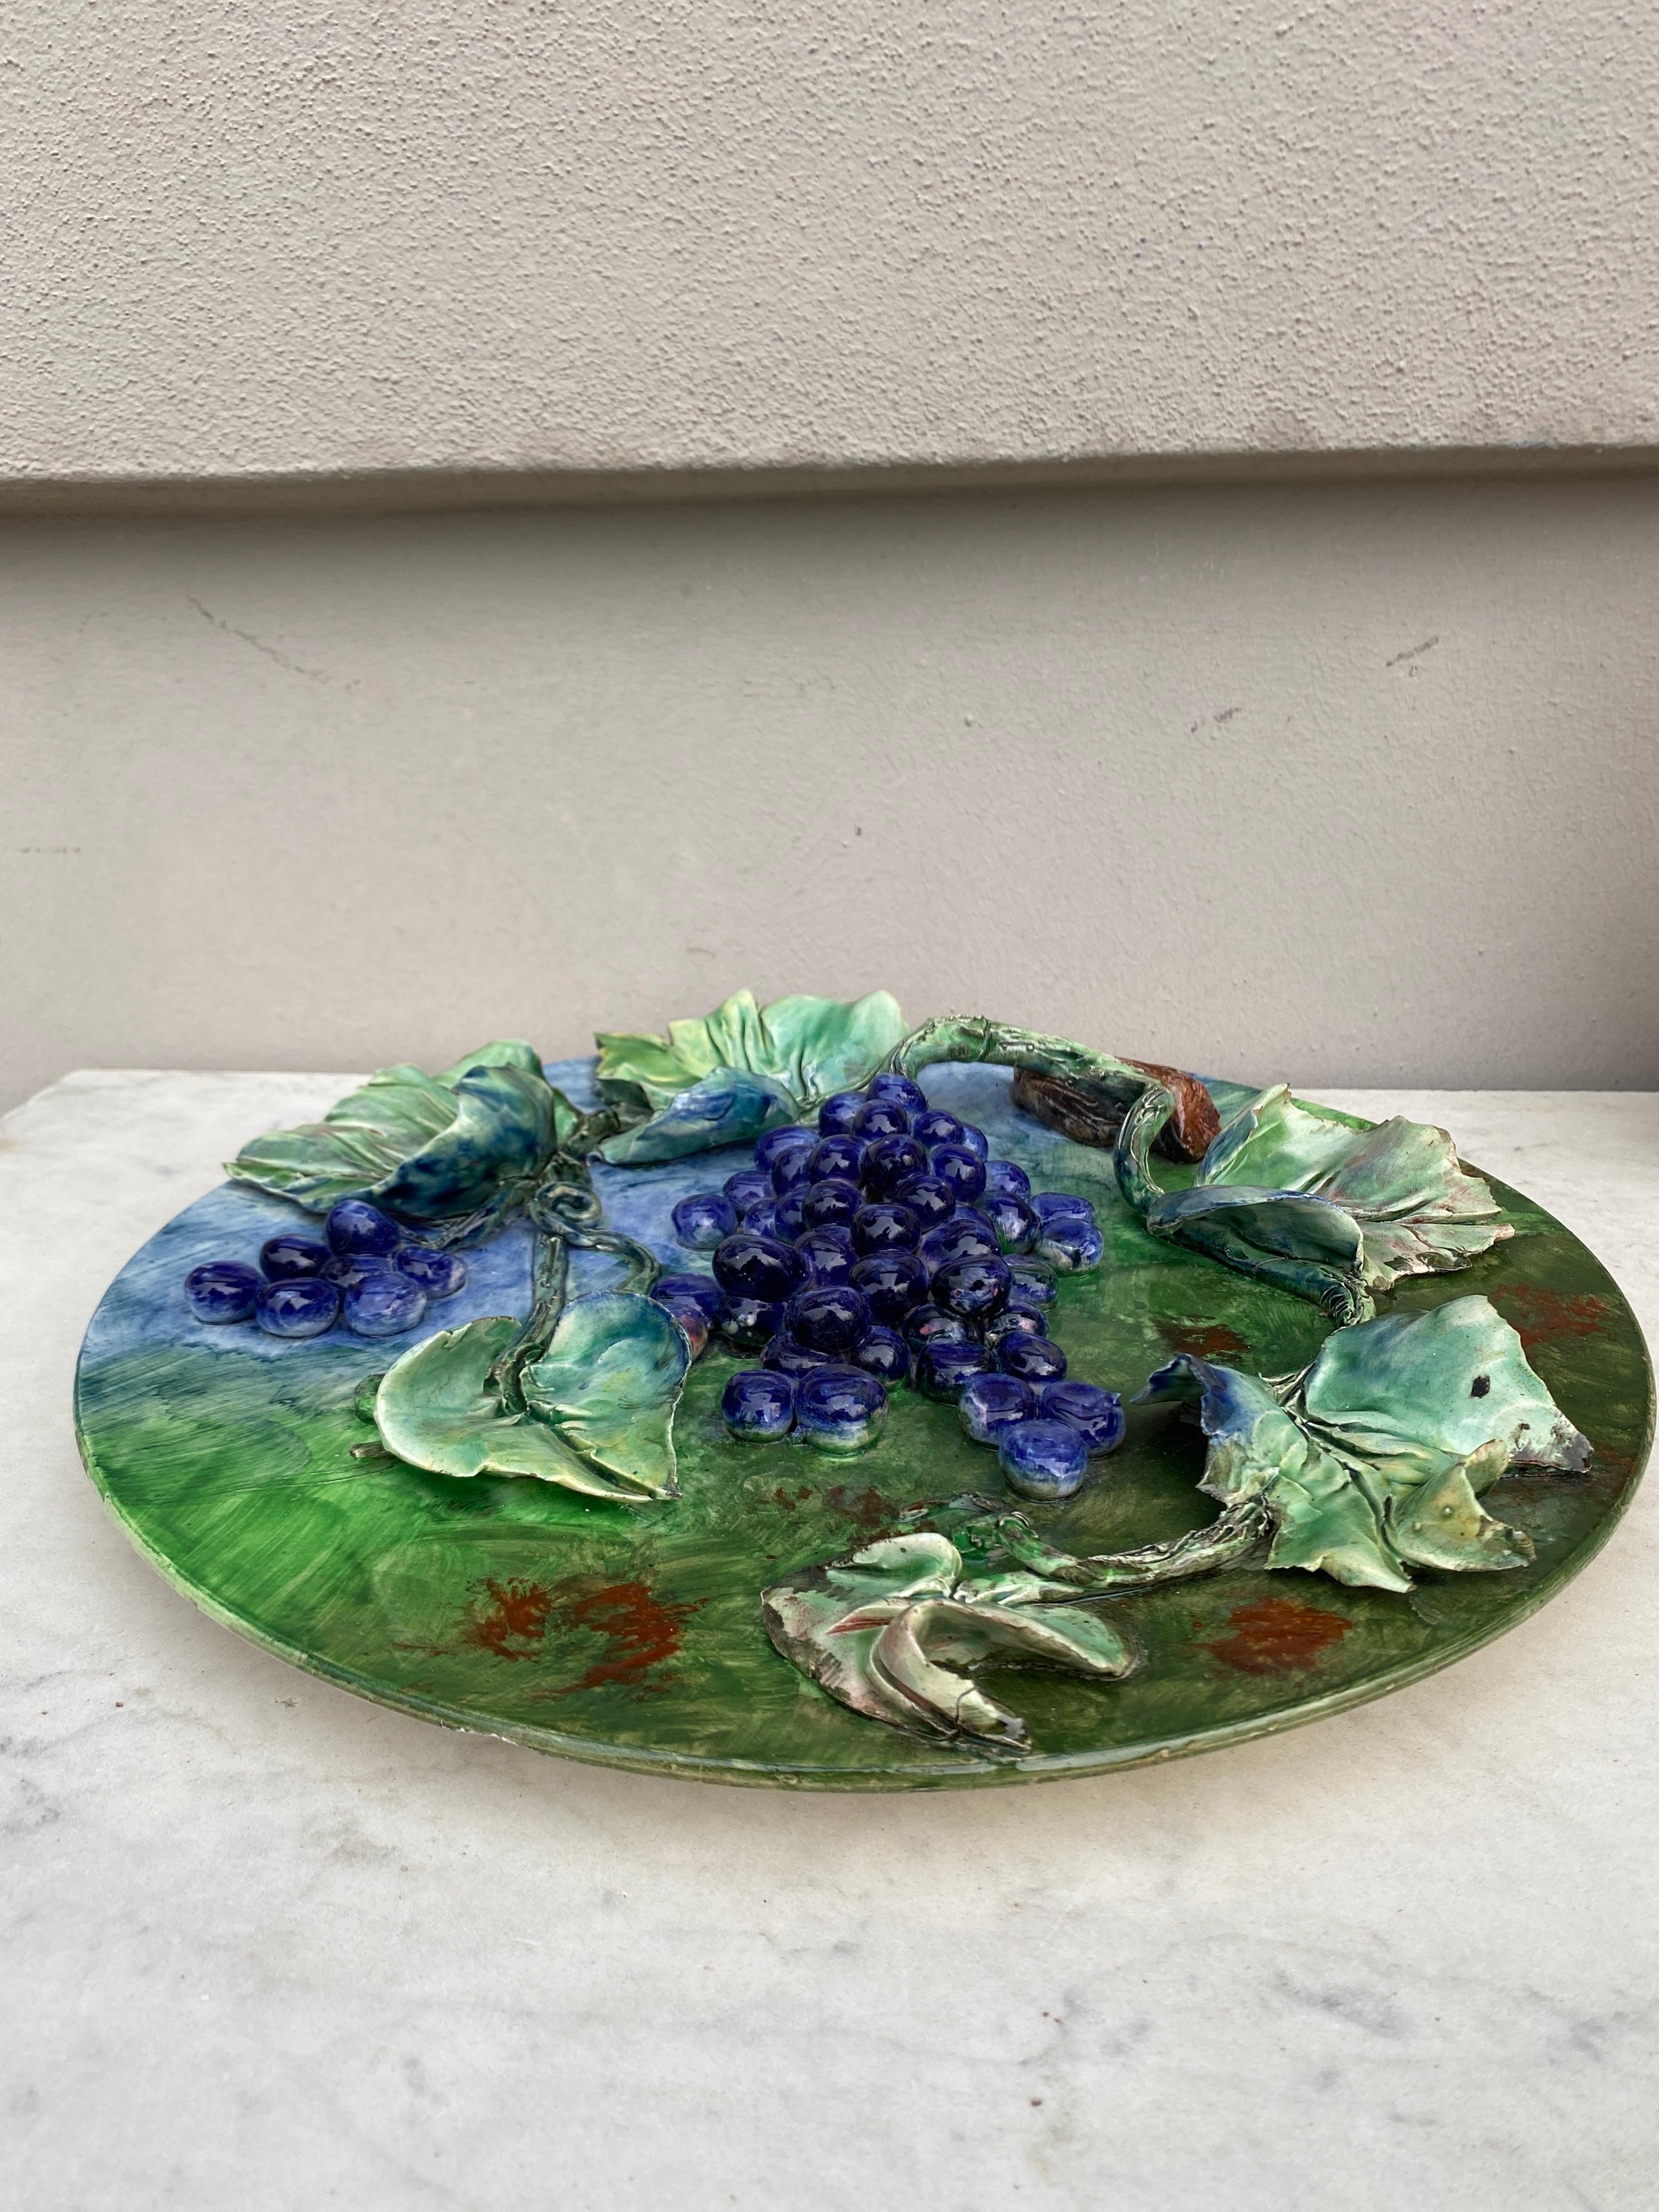 Colorful 19th century French Majolica grapes wall platter signed Longchamp terre de fer. The fruits are in high relief with the leaves and branches.
The manufacture of Longchamp produced this fruits platters with various fruits in four different